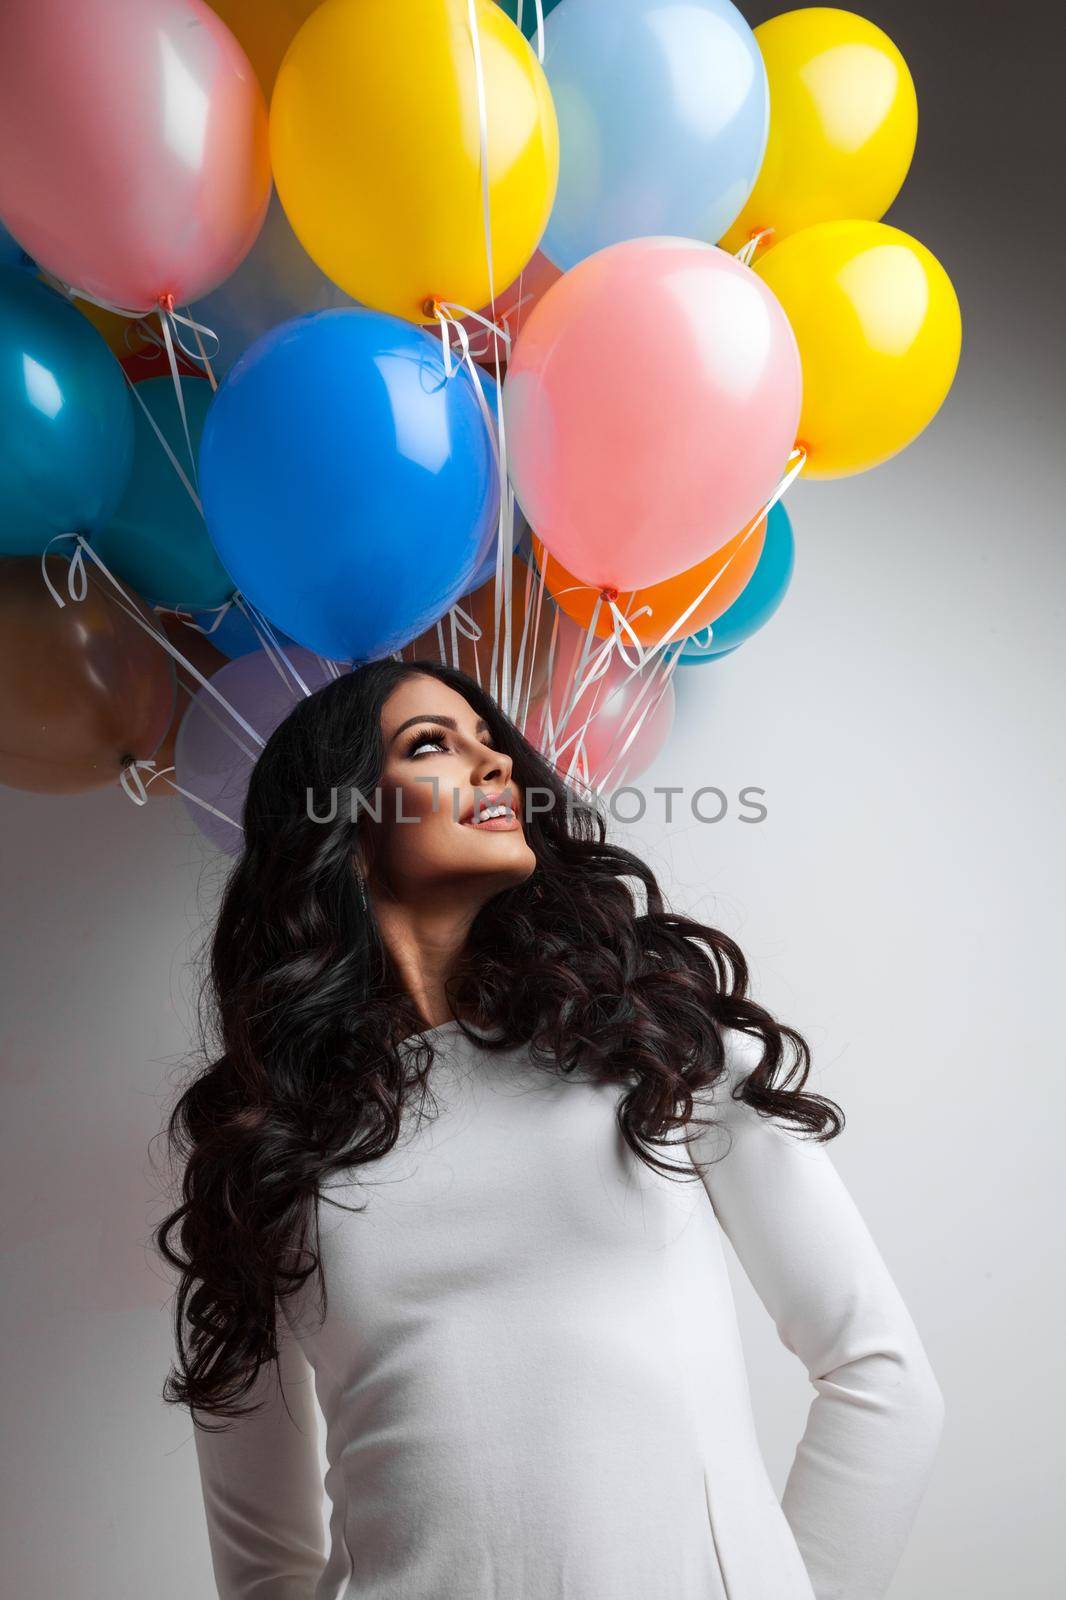 Happy girl with many colorful balloons birthday Valentine day gift